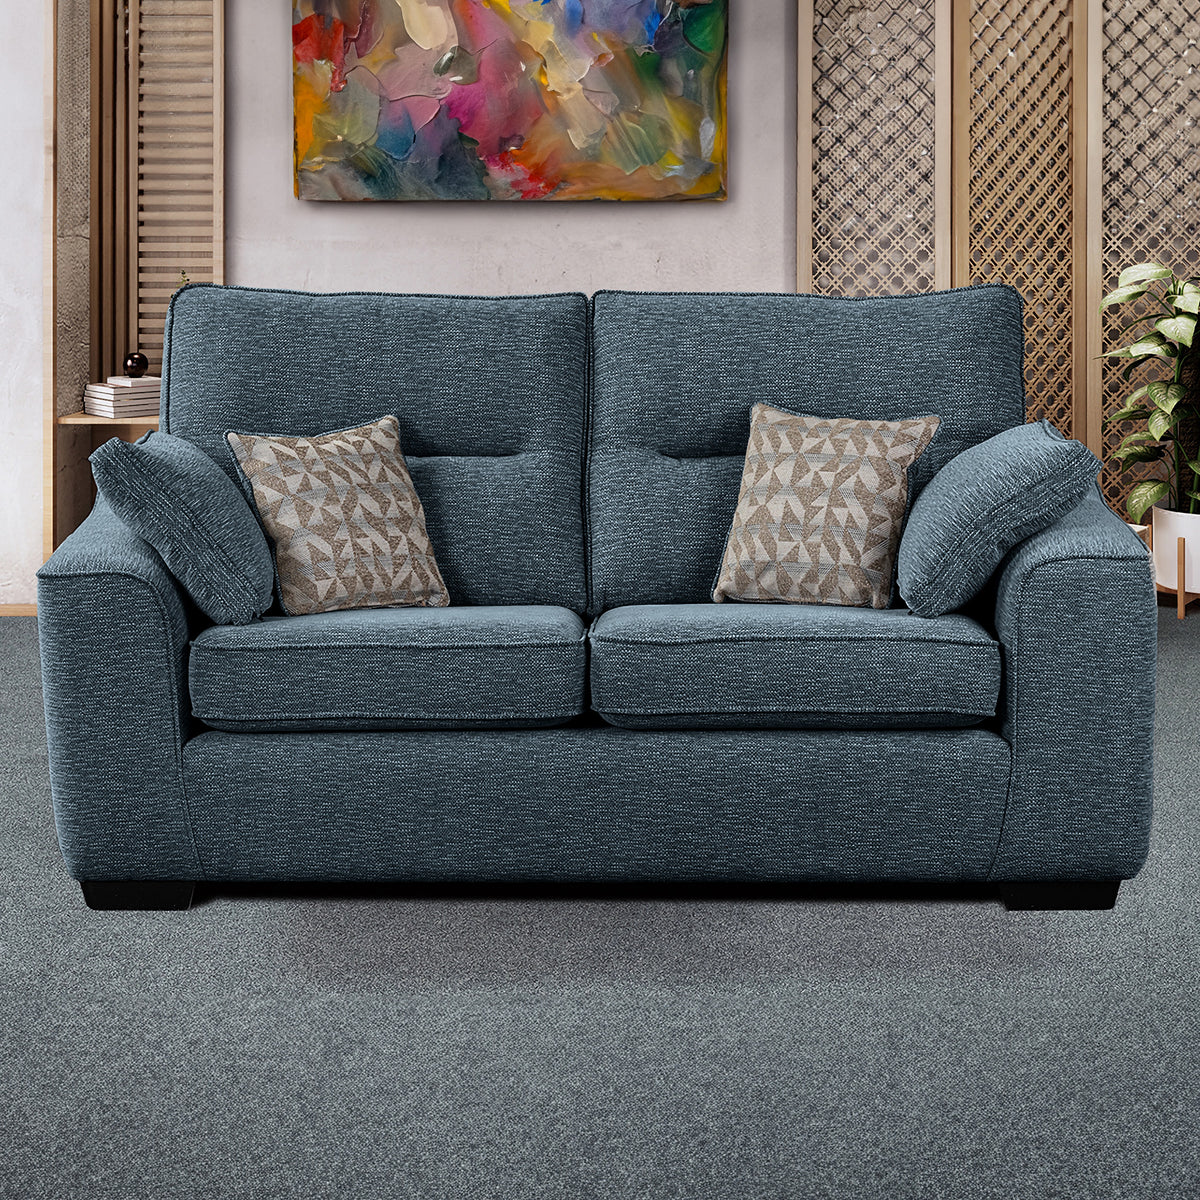 Sudbury Aegean 2 Seater Sofabed with Taupe Scatter Cushions for living room